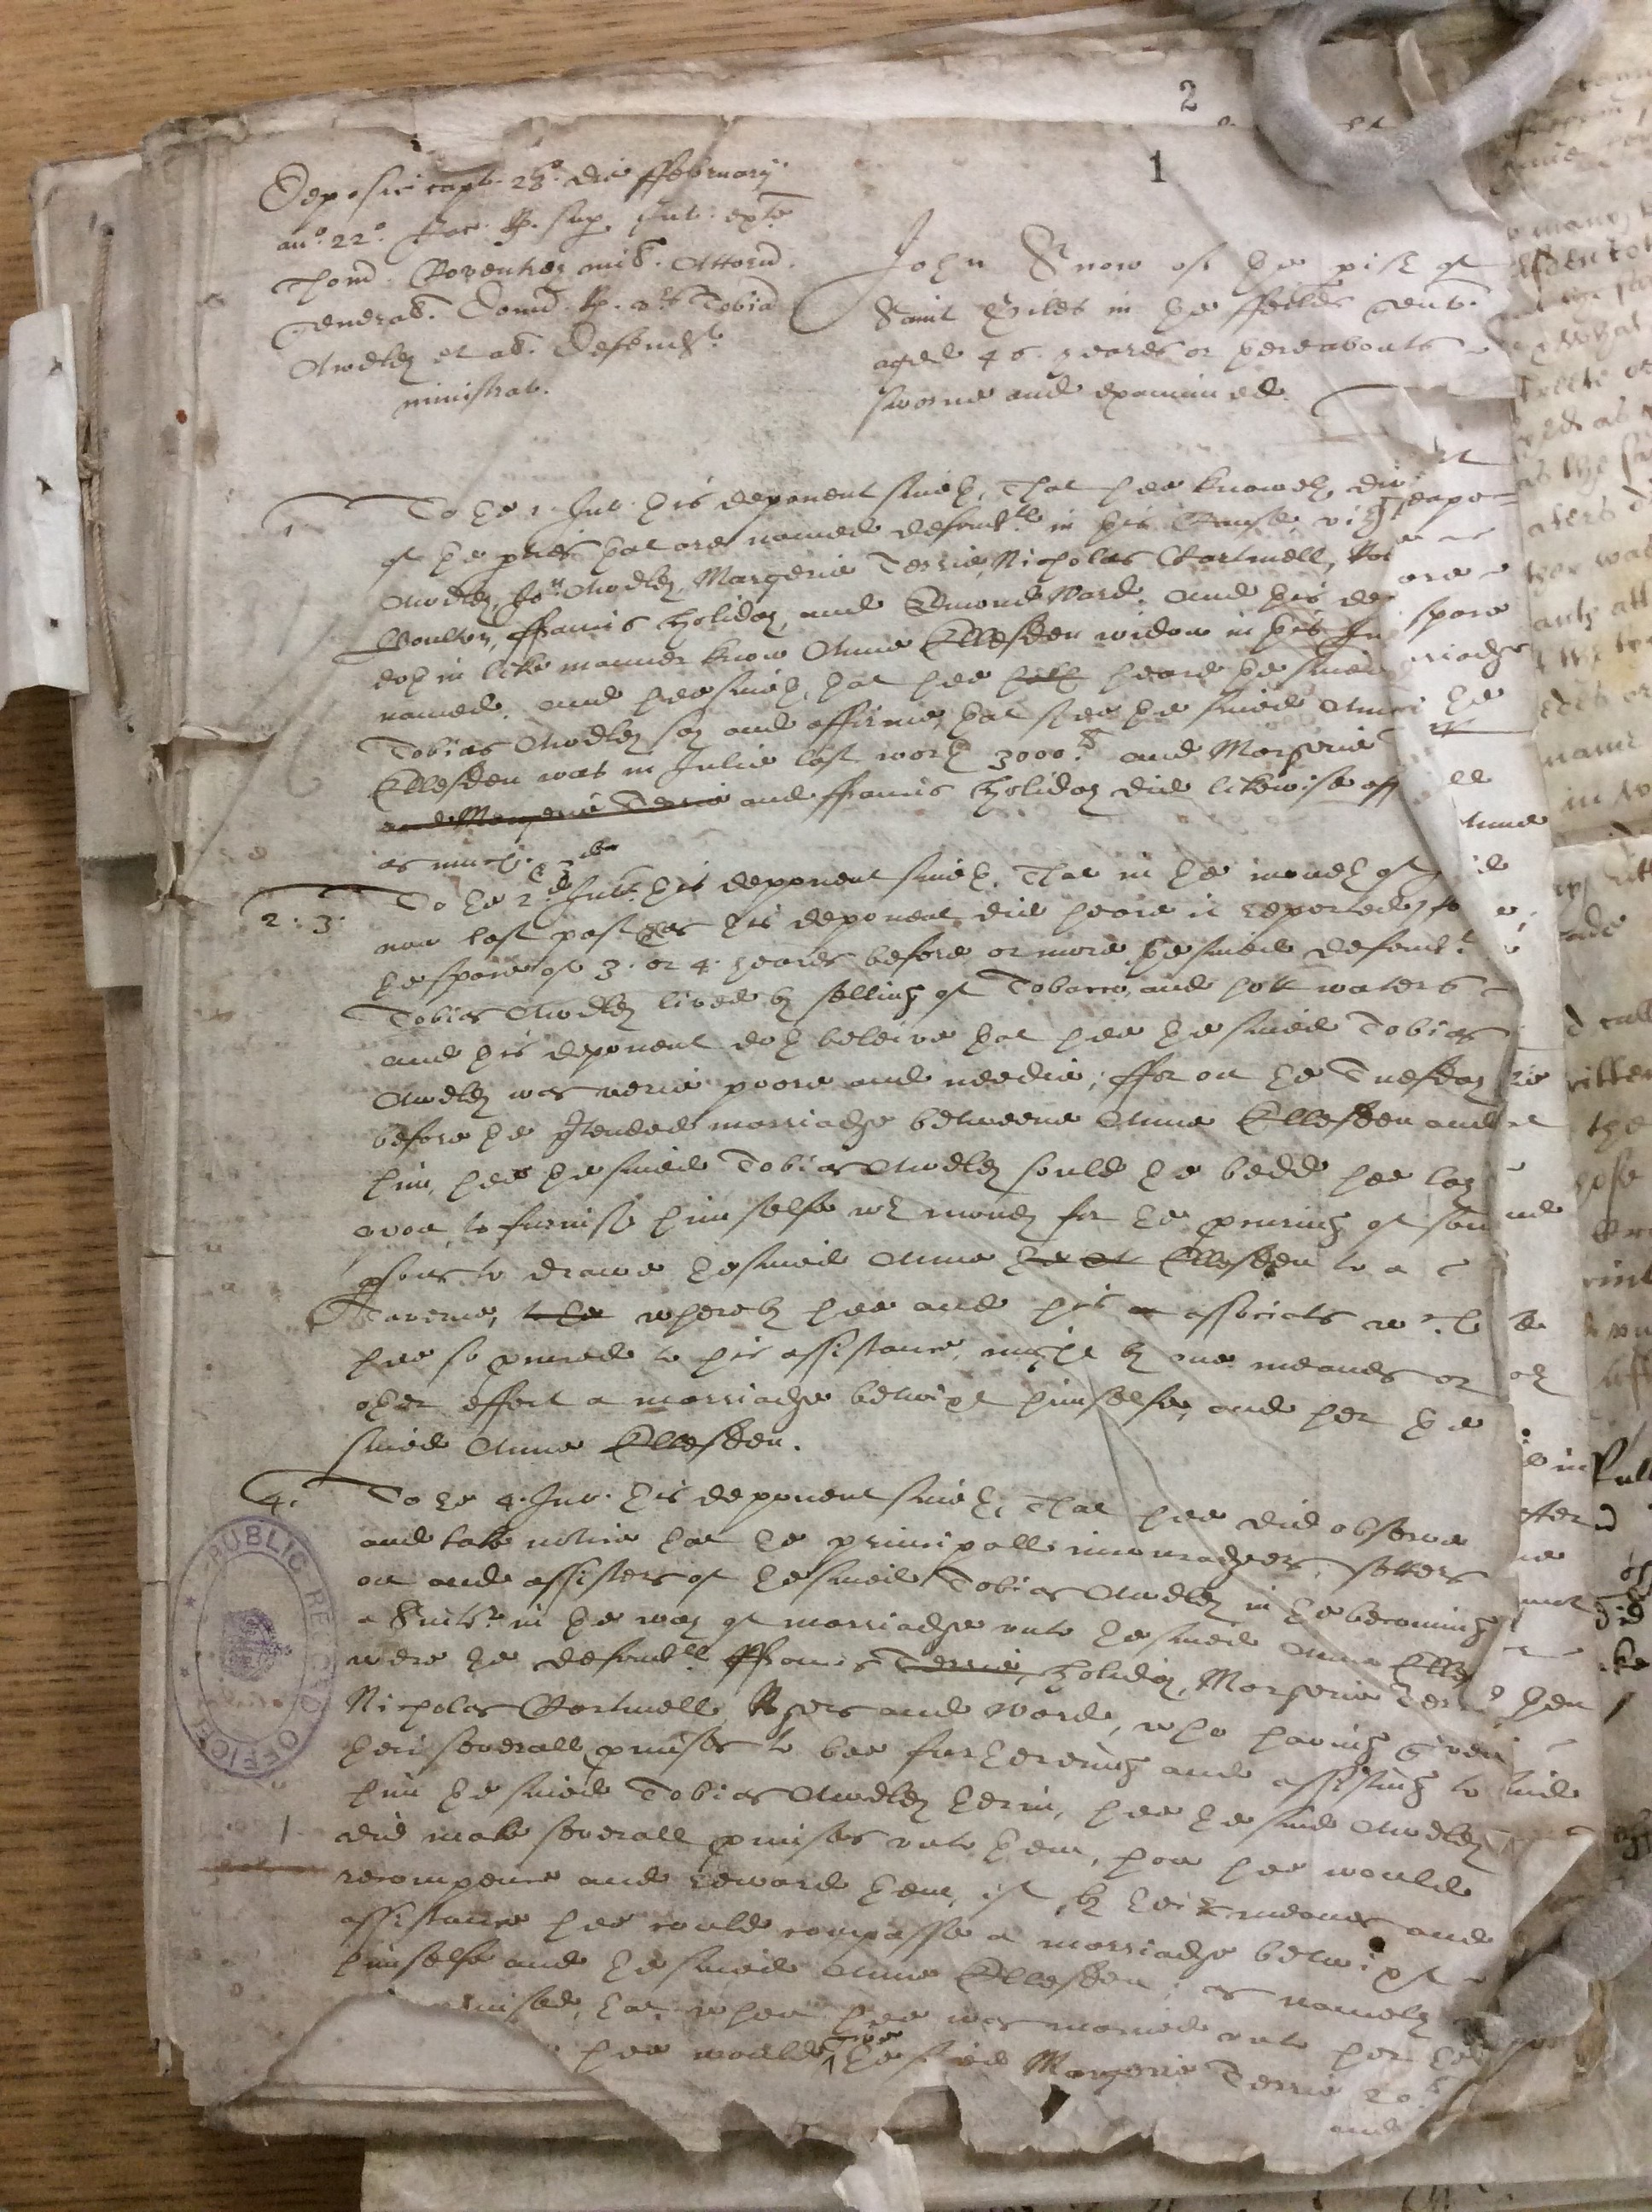 The deposition of John Snowe in one of the lawsuits over the marriage of Anne Elsden and Tobias Audley, one of the documents on which our symposium and workshop scenes drew. The National Archives, STAC 8/13/16 [link: http://discovery.nationalarchives.gov.uk/details/r/C5568370]. We are very grateful to Lauren Cantos, Kim Gilchrist, Jennifer Hardy, Suzanne Lawrence, Miranda Fay Thomas and Jennifer Young for helping us to prepare transcriptions of the lawsuits